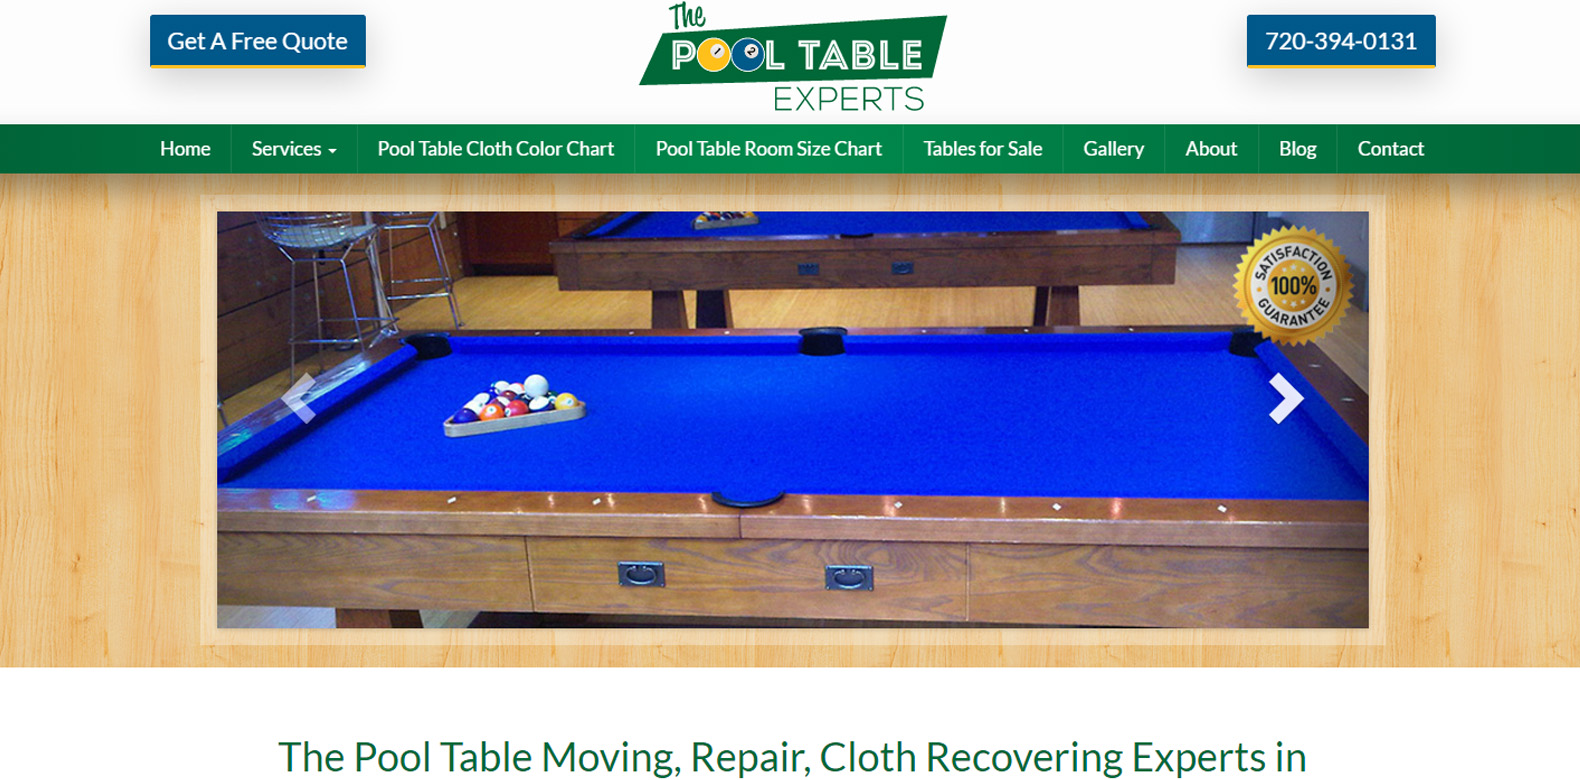 
New Upgrade Launched: The Pool Table Experts